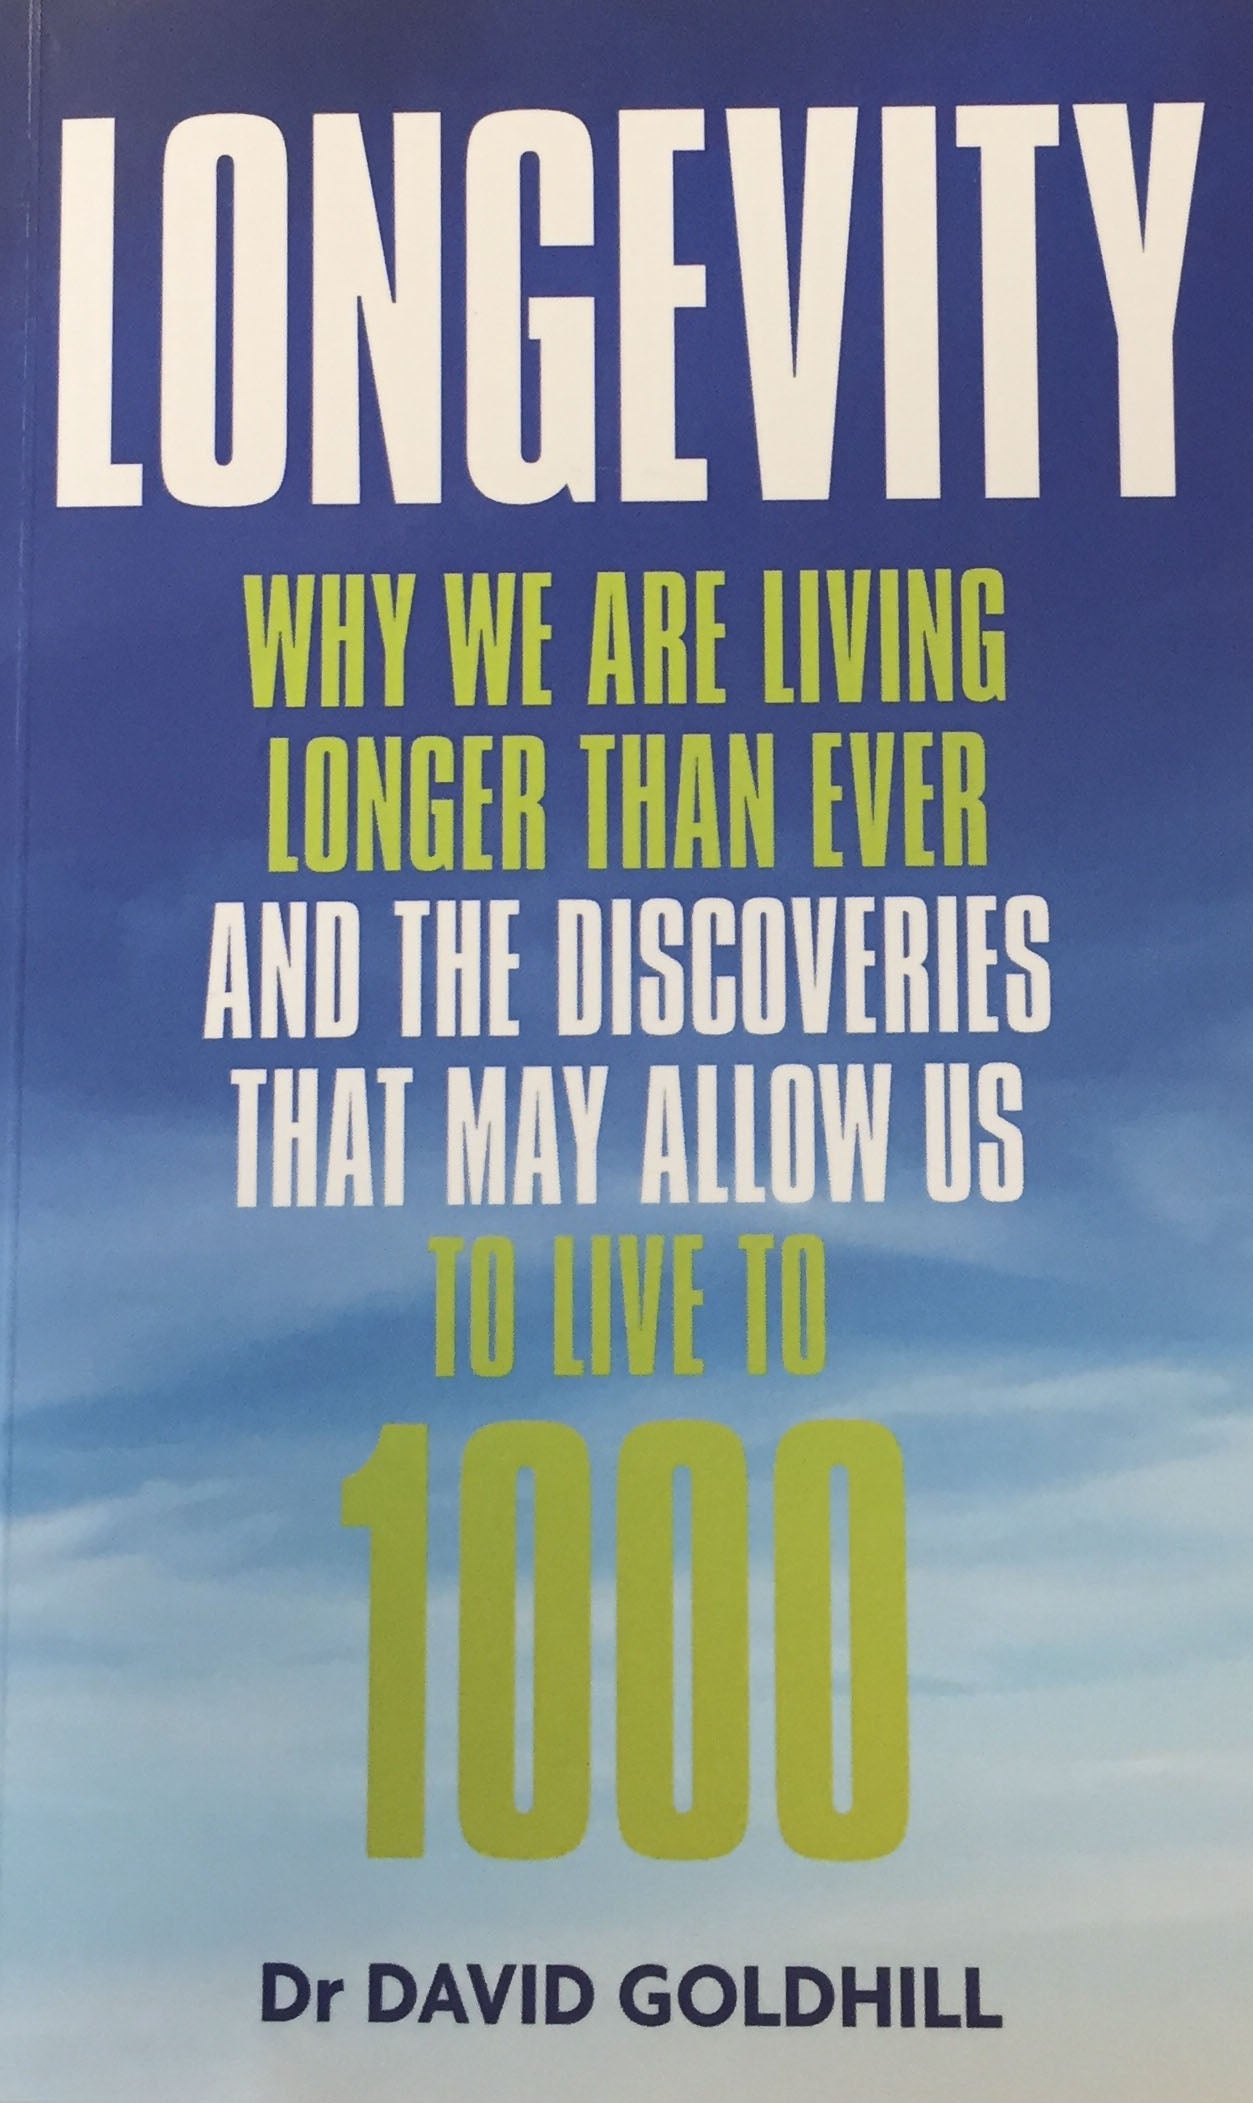 *Longevity: Why we are living longer than ever and the discoveries that may allow us to live to 1000 by Dr David Goldhill is available from Amazon for £10 as a book or £4.97 for the Kindle edition.